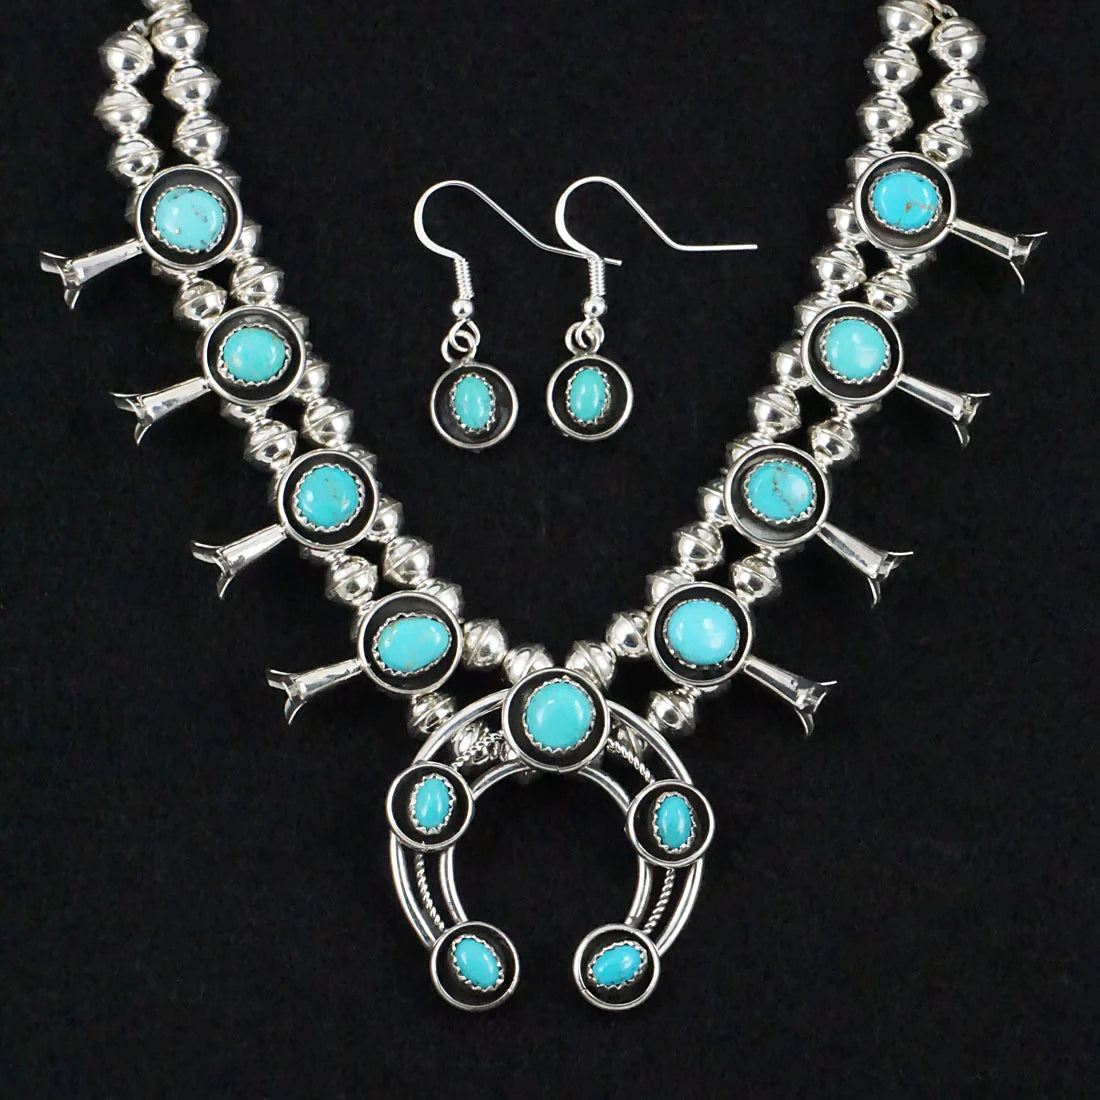 Turquoise & Sterling Silver "Mini" Squash Blossom Necklace & Earrings